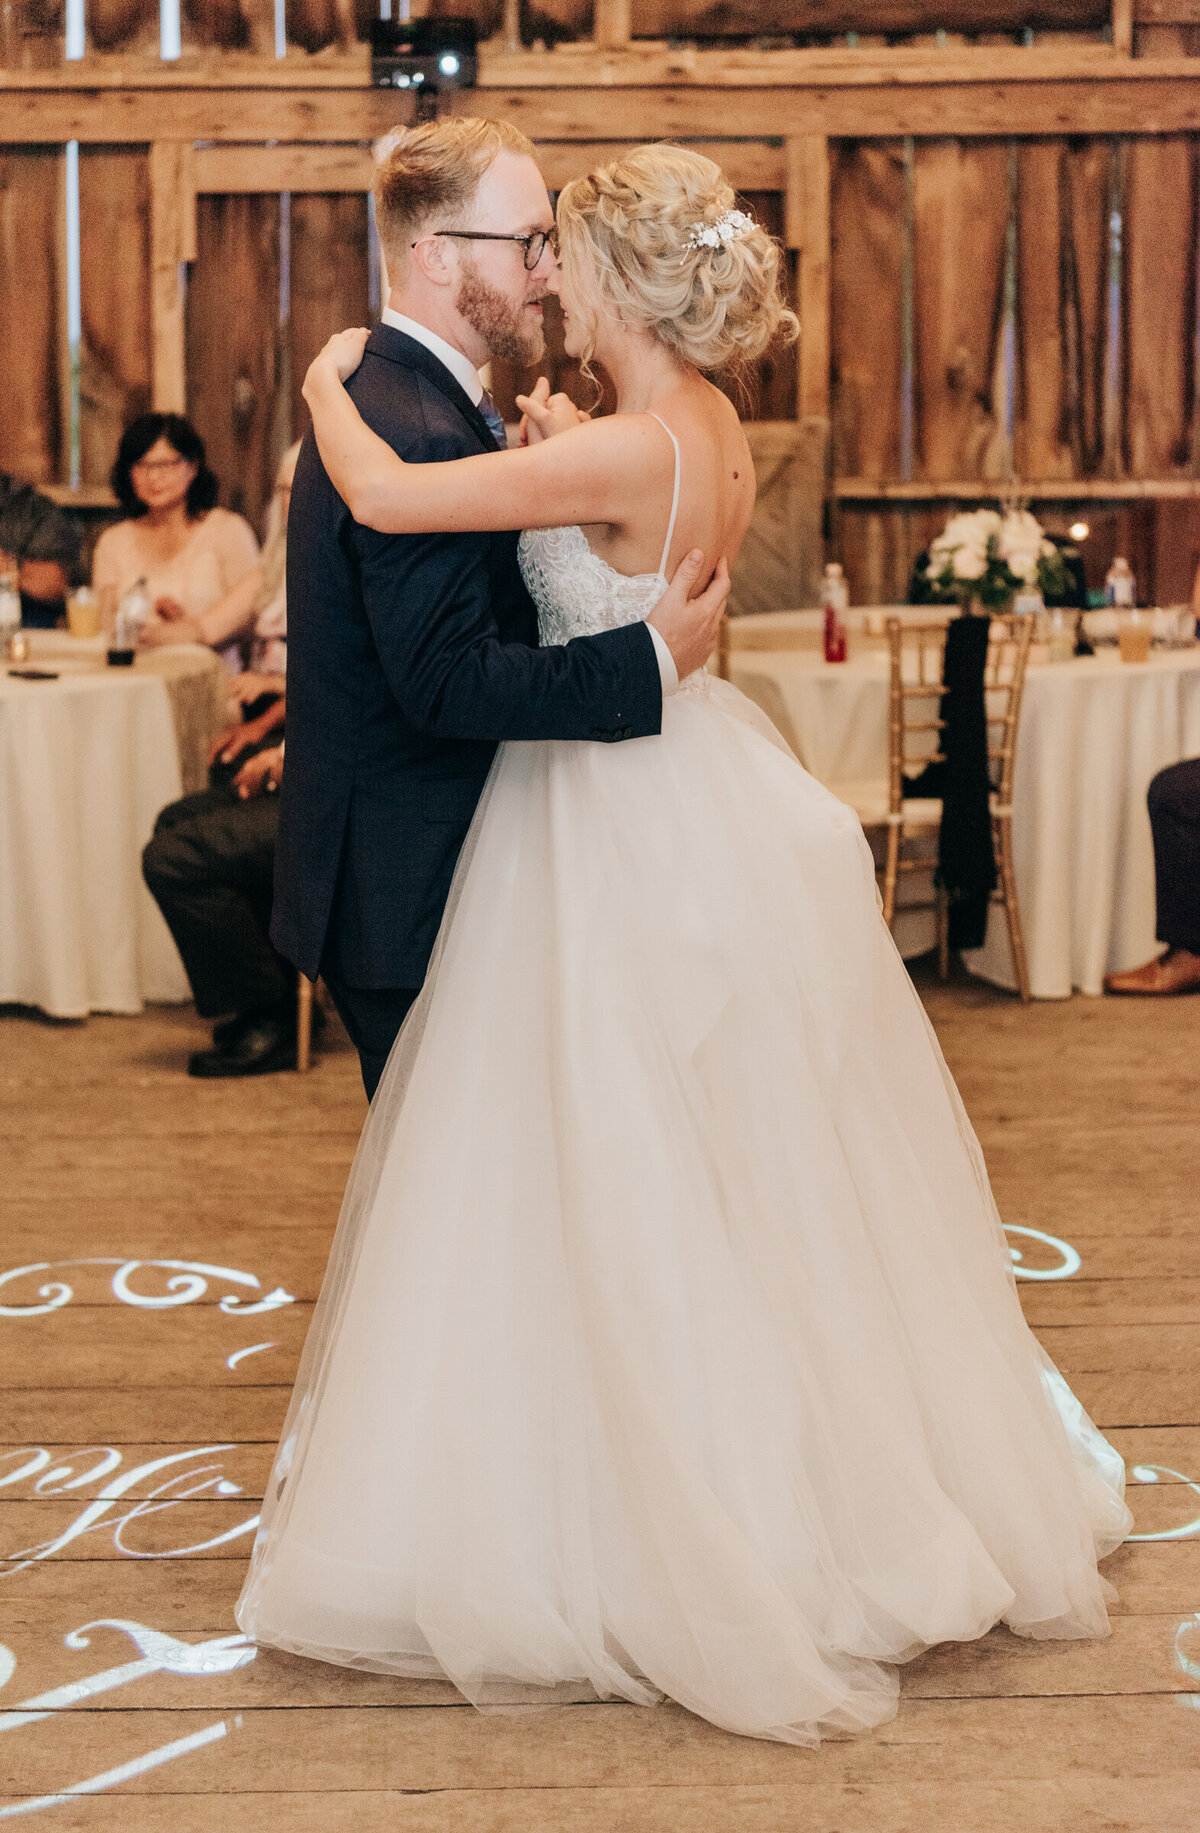 Bride and groom enjoying their first dance at glamorous Willow Creek Barn reception photographed by Nova Markina